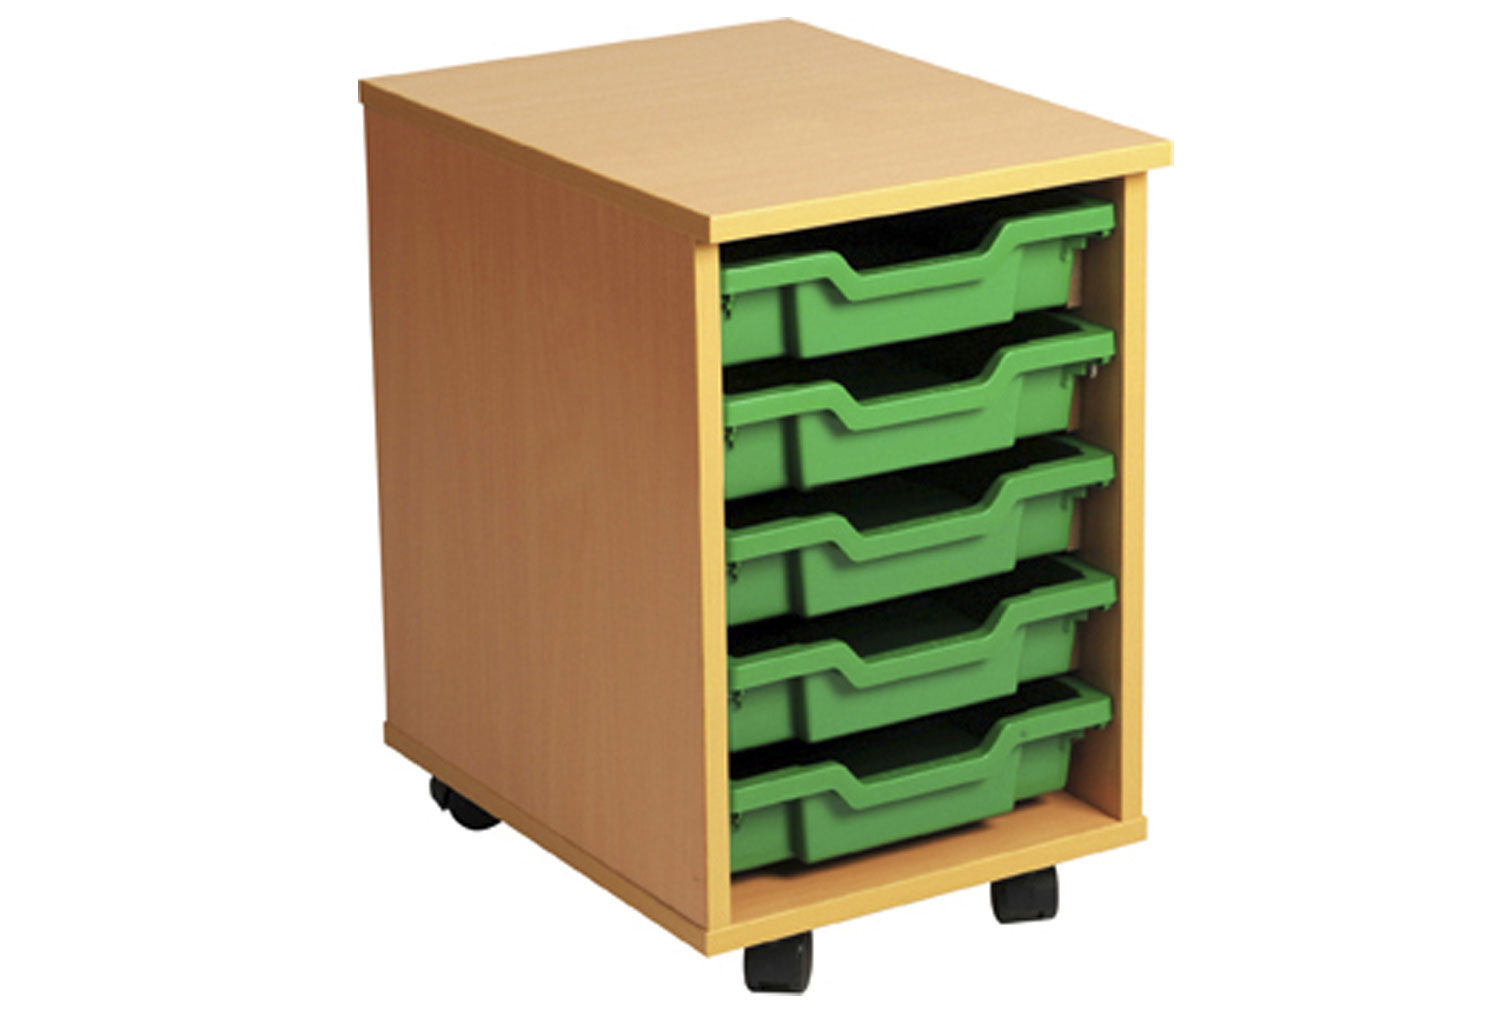 Primary Single Column Mobile Classroom Tray Storage Unit With 5 Shallow Classroom Trays, Beech/ Green Classroom Trays